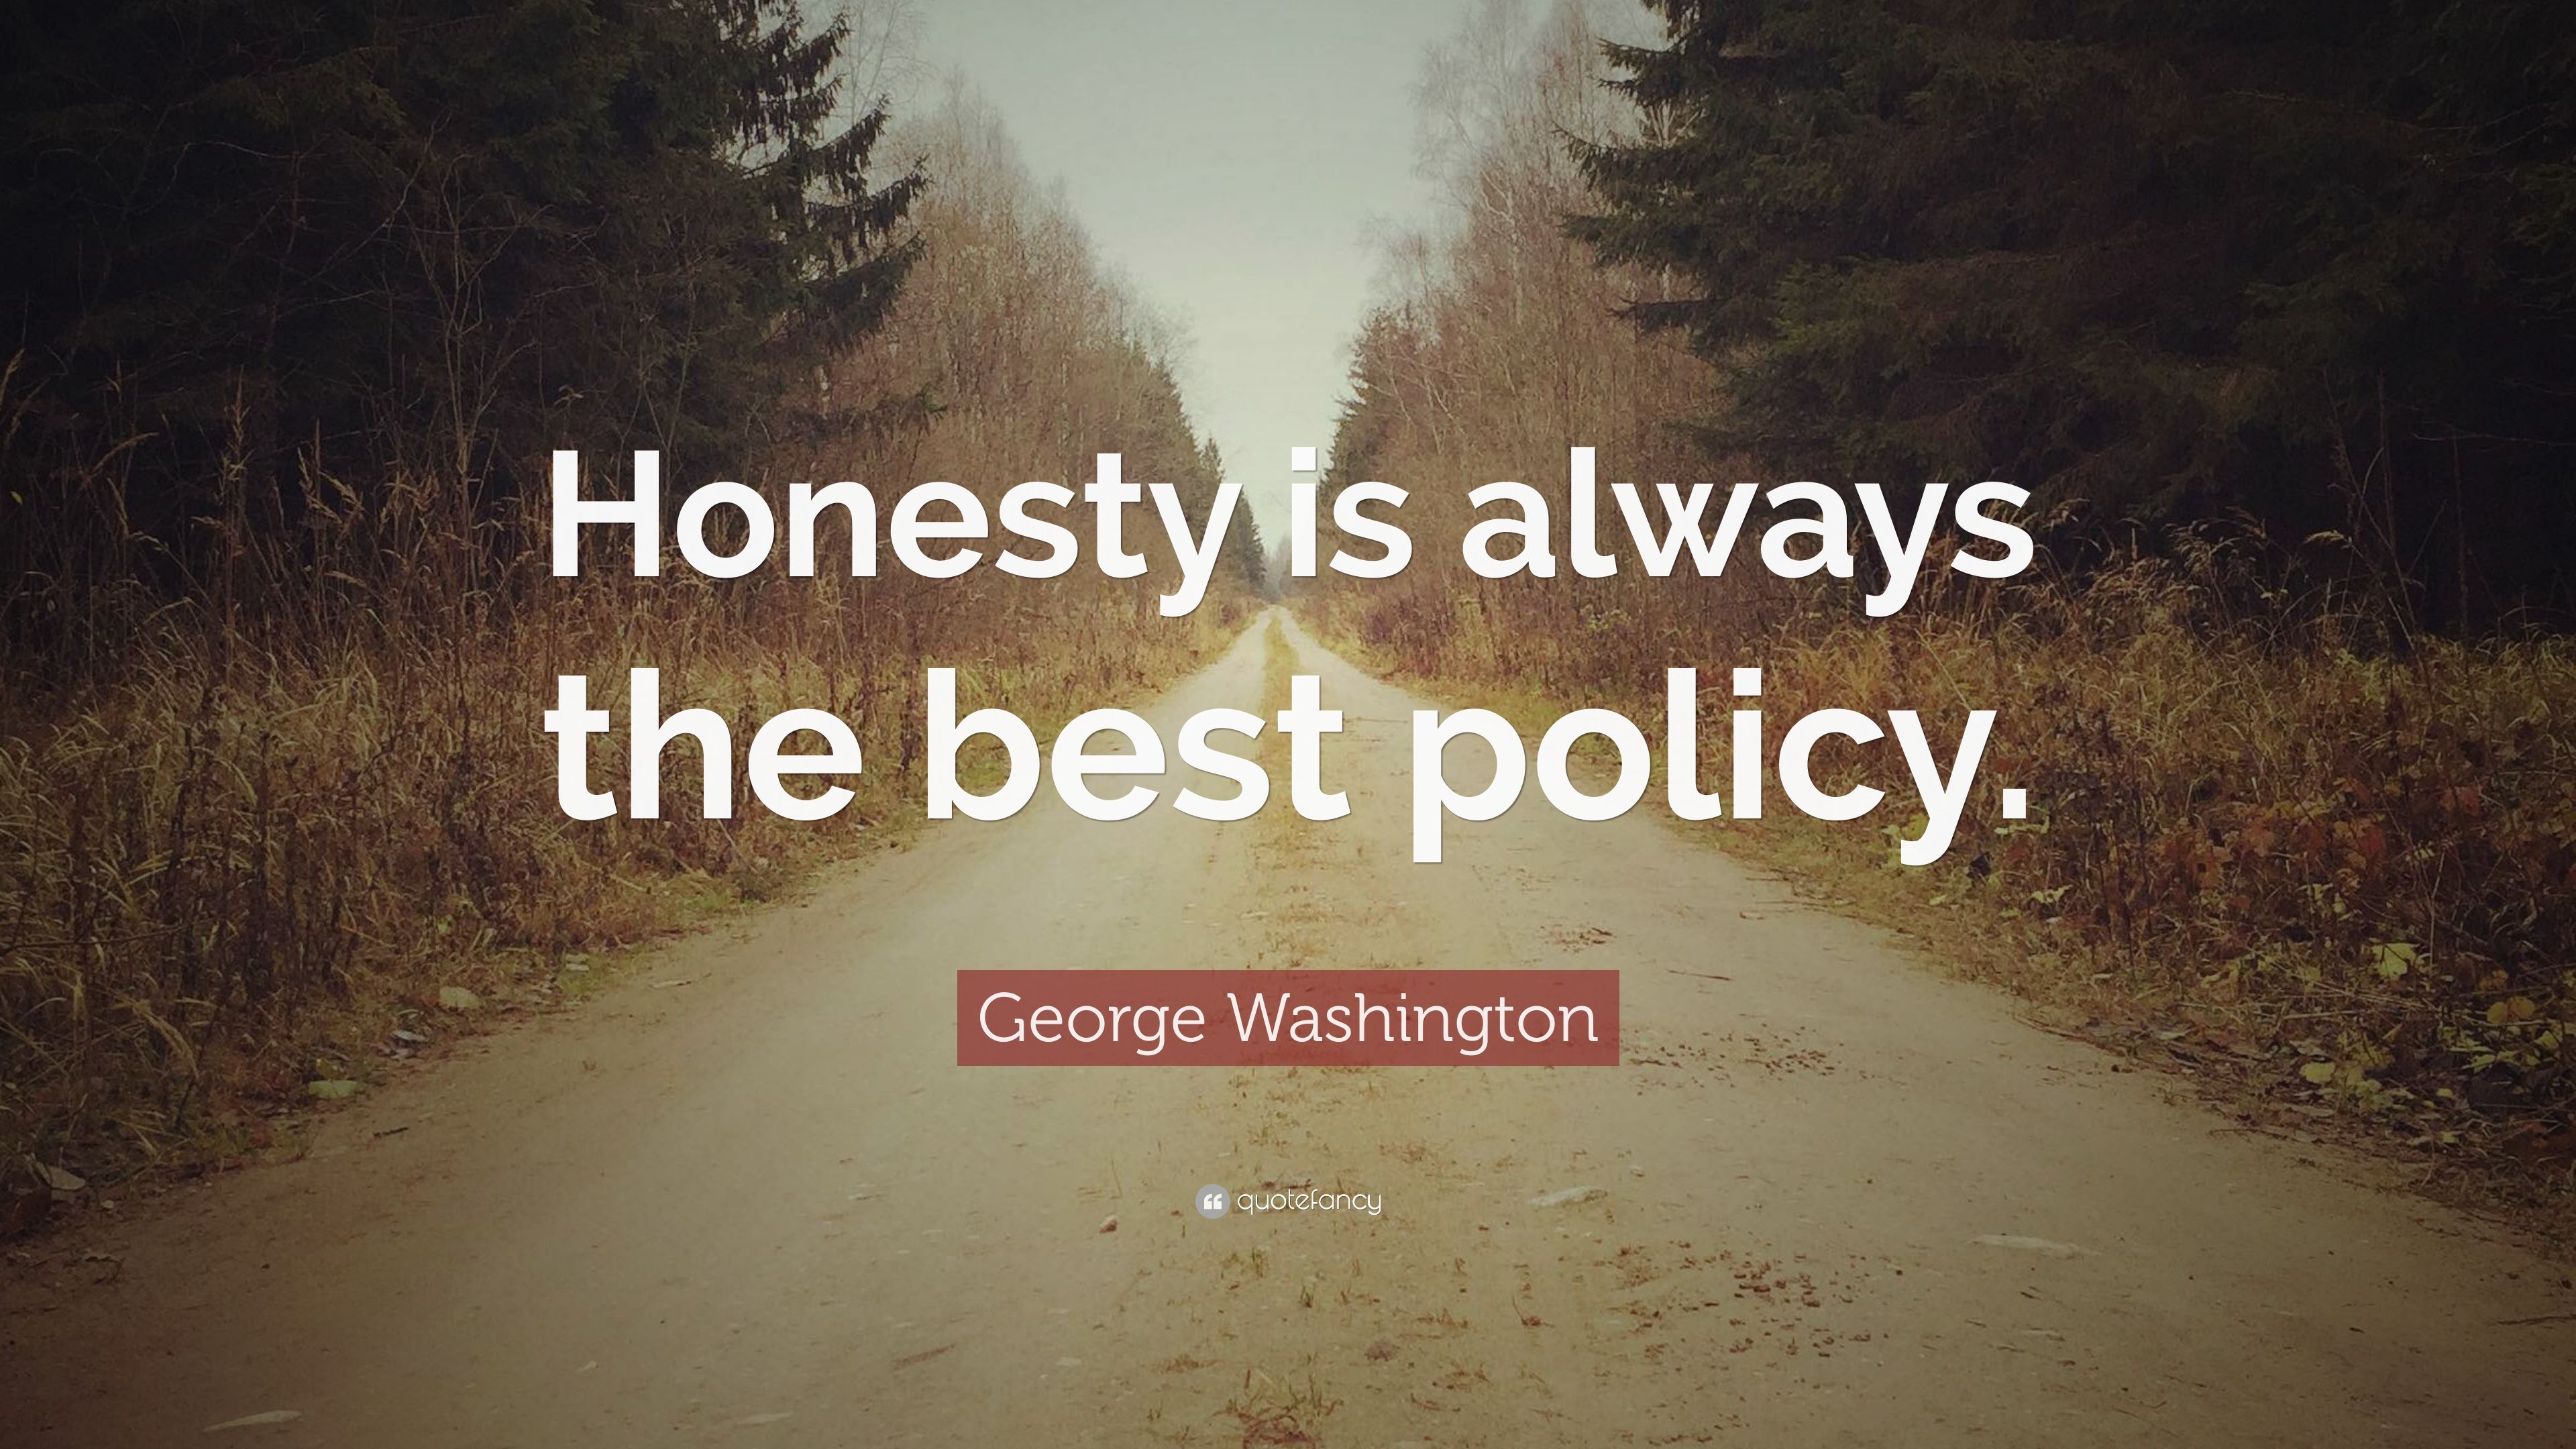 George Washington Quote: “Honesty is always the best policy.” (12 wallpaper)